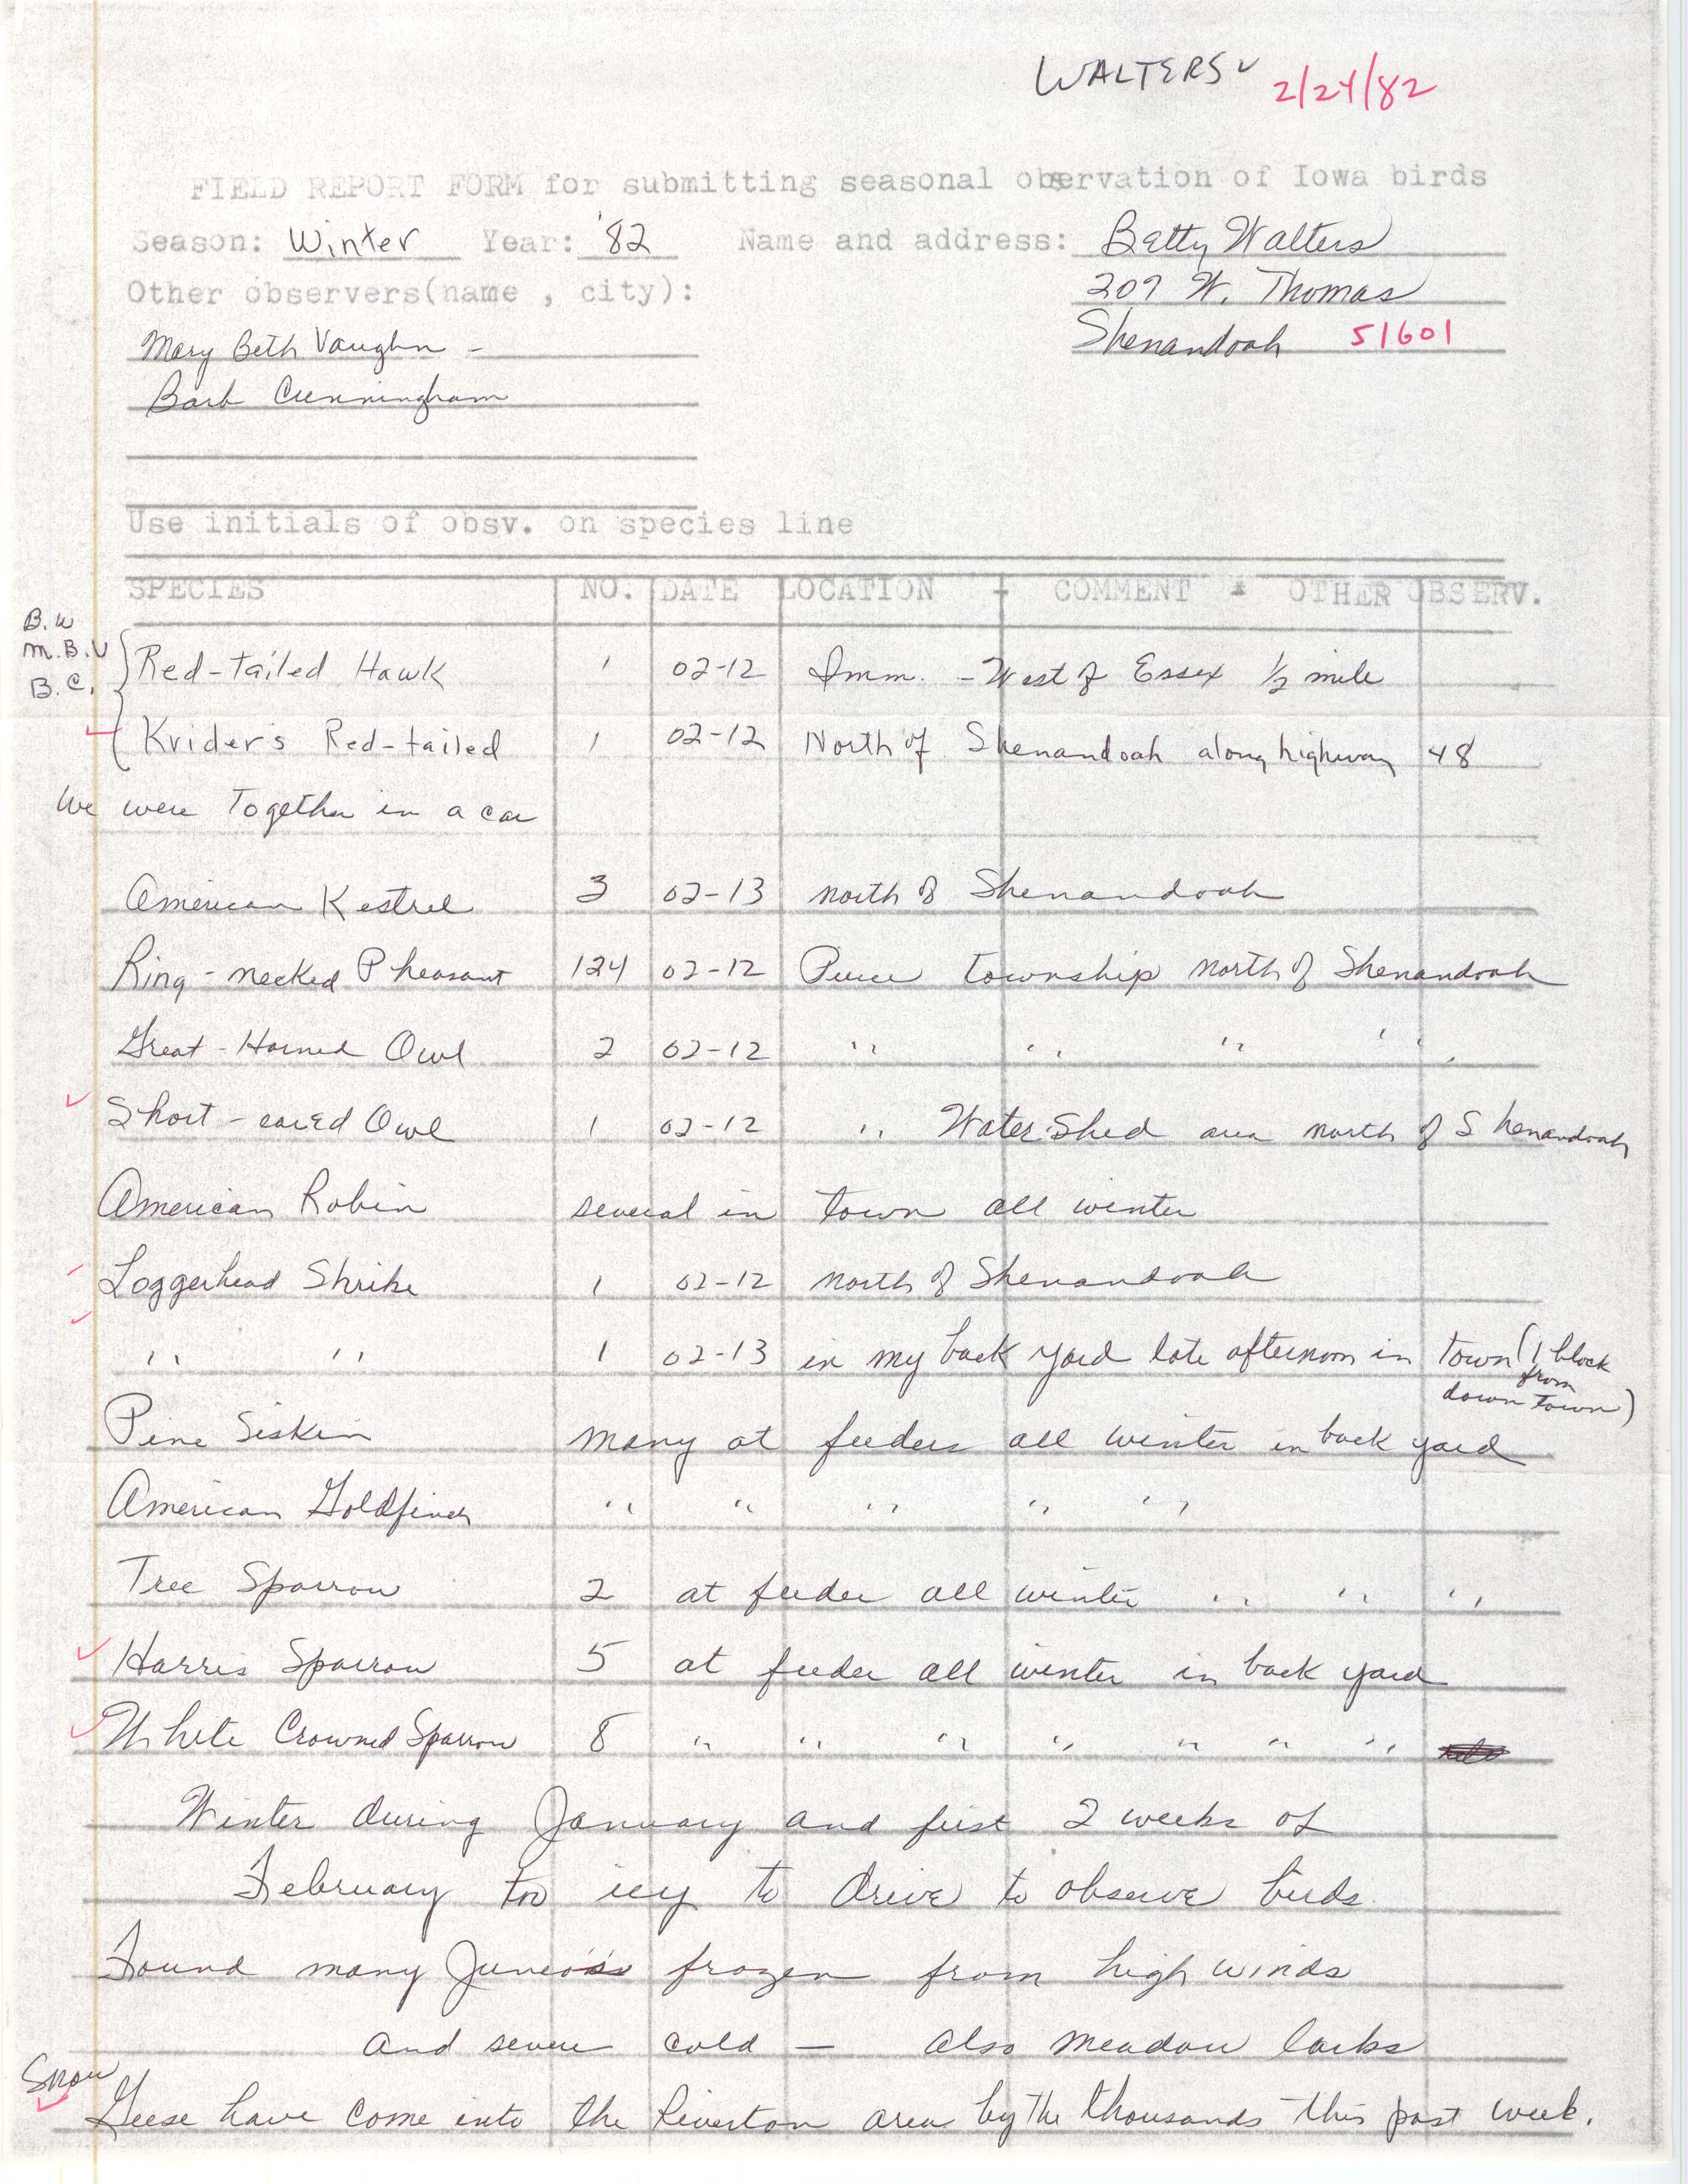 Field notes contributed by Betty Walters, February 24, 1982